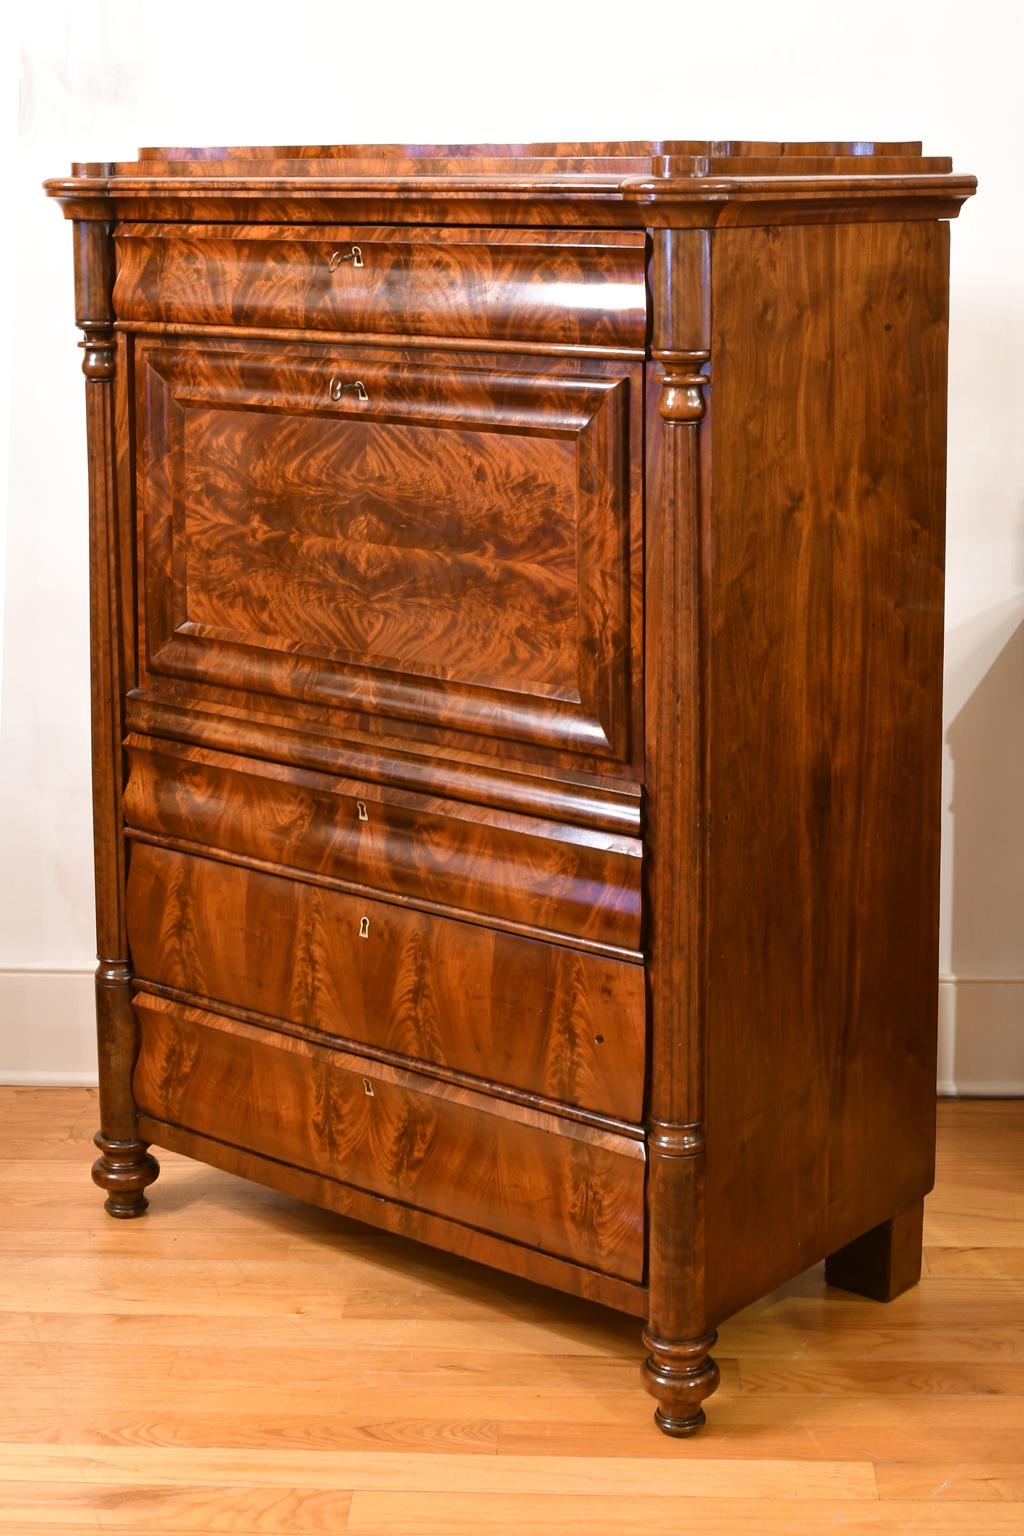 Biedermeier Antique Chest with Fall-Front Secretary Desk in West Indies Mahogany, Denmark